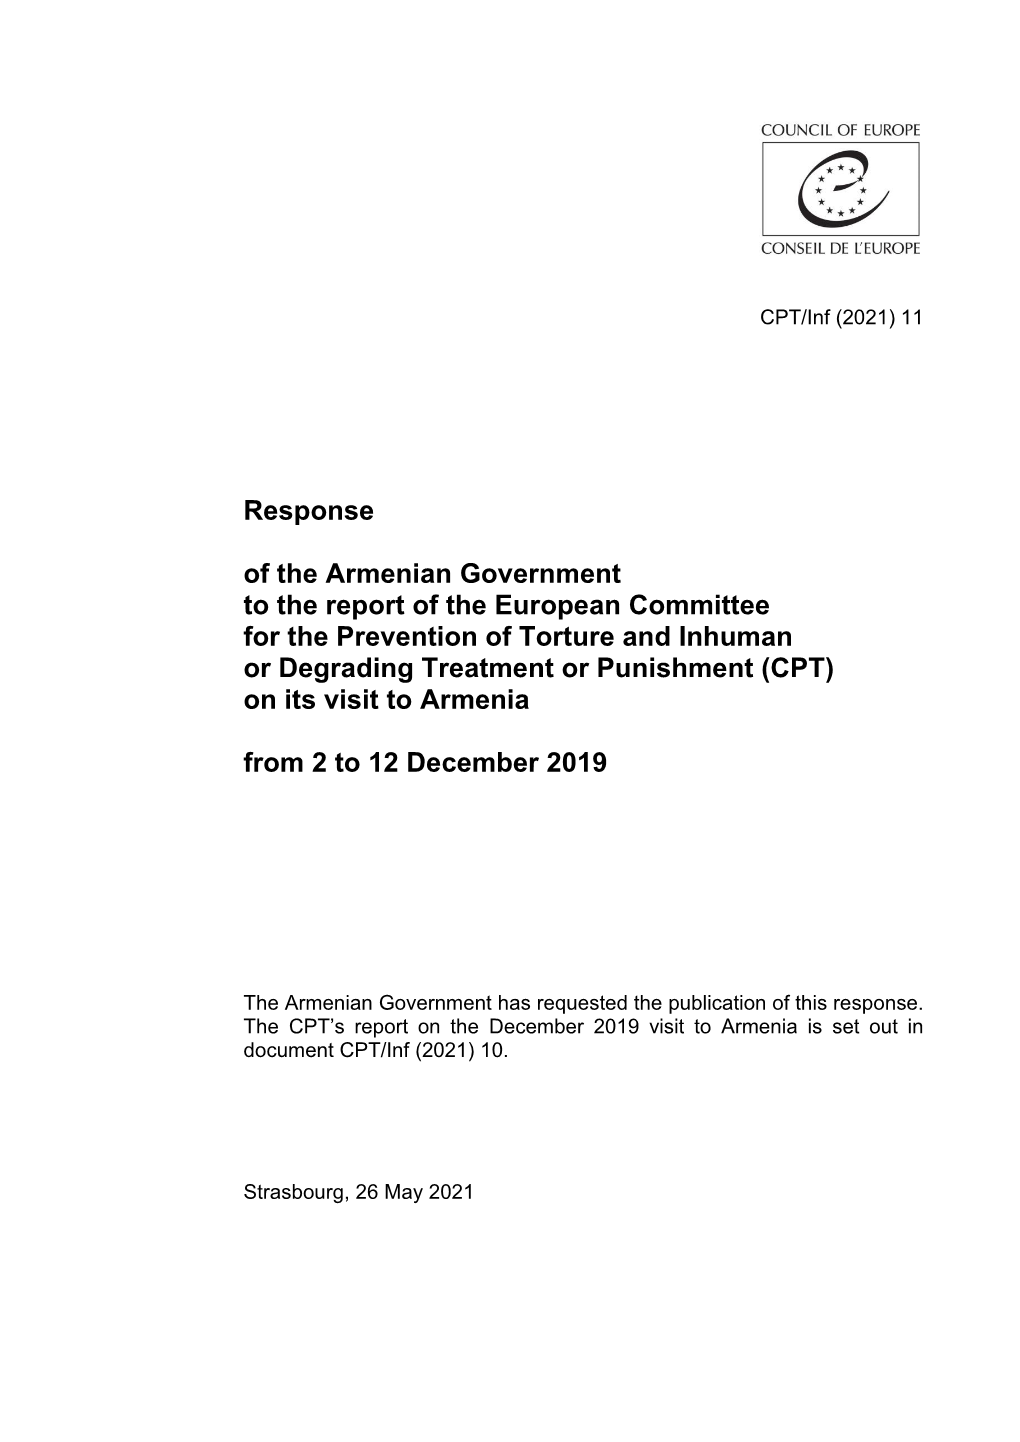 Response of the Armenian Government to the Report of The